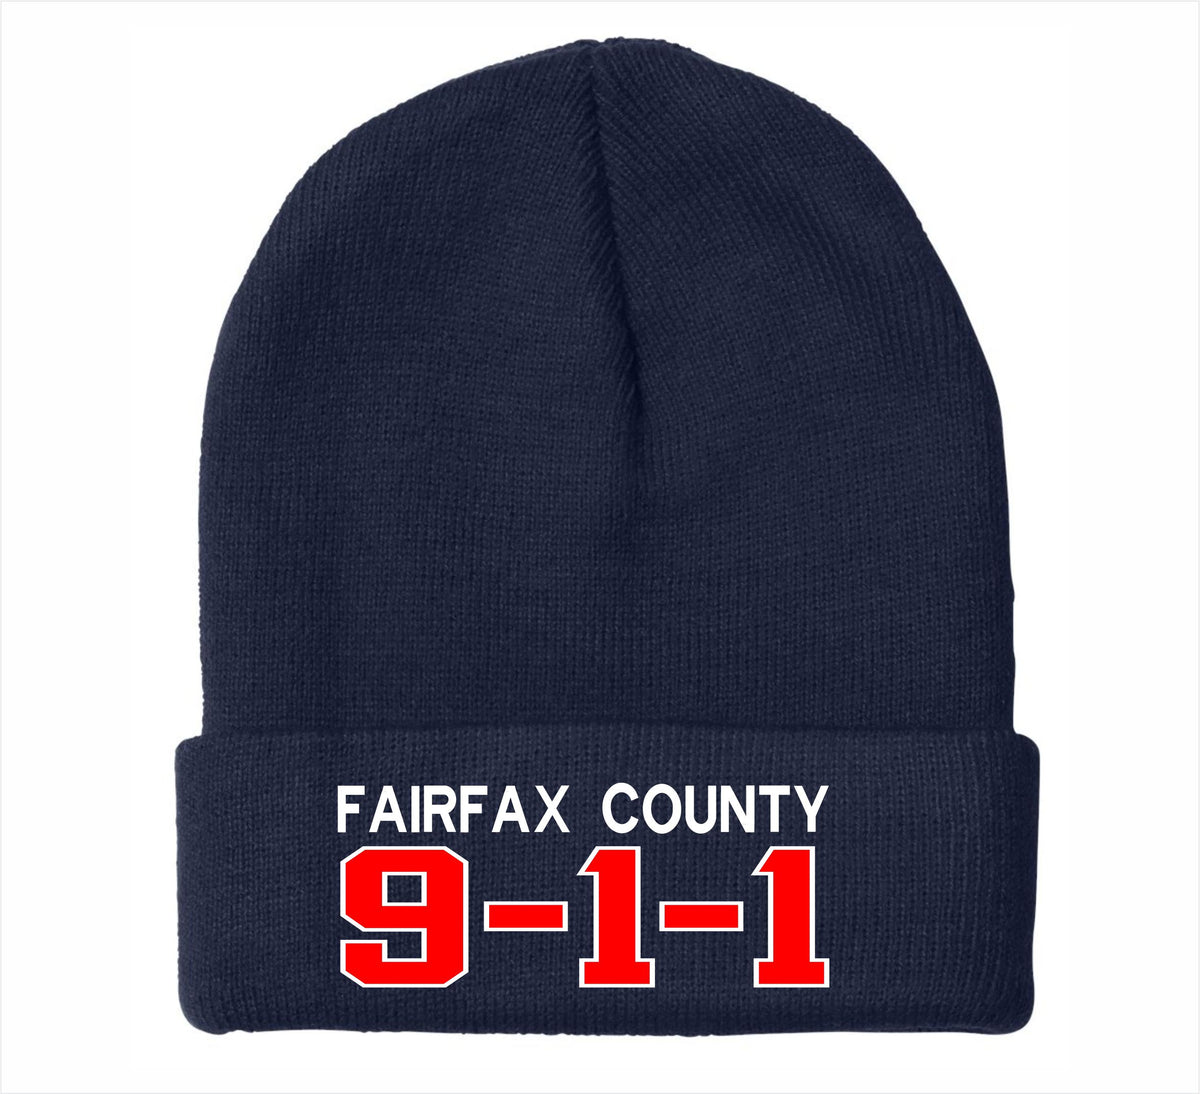 Fairfax County 911 Embroidered Winter Hat